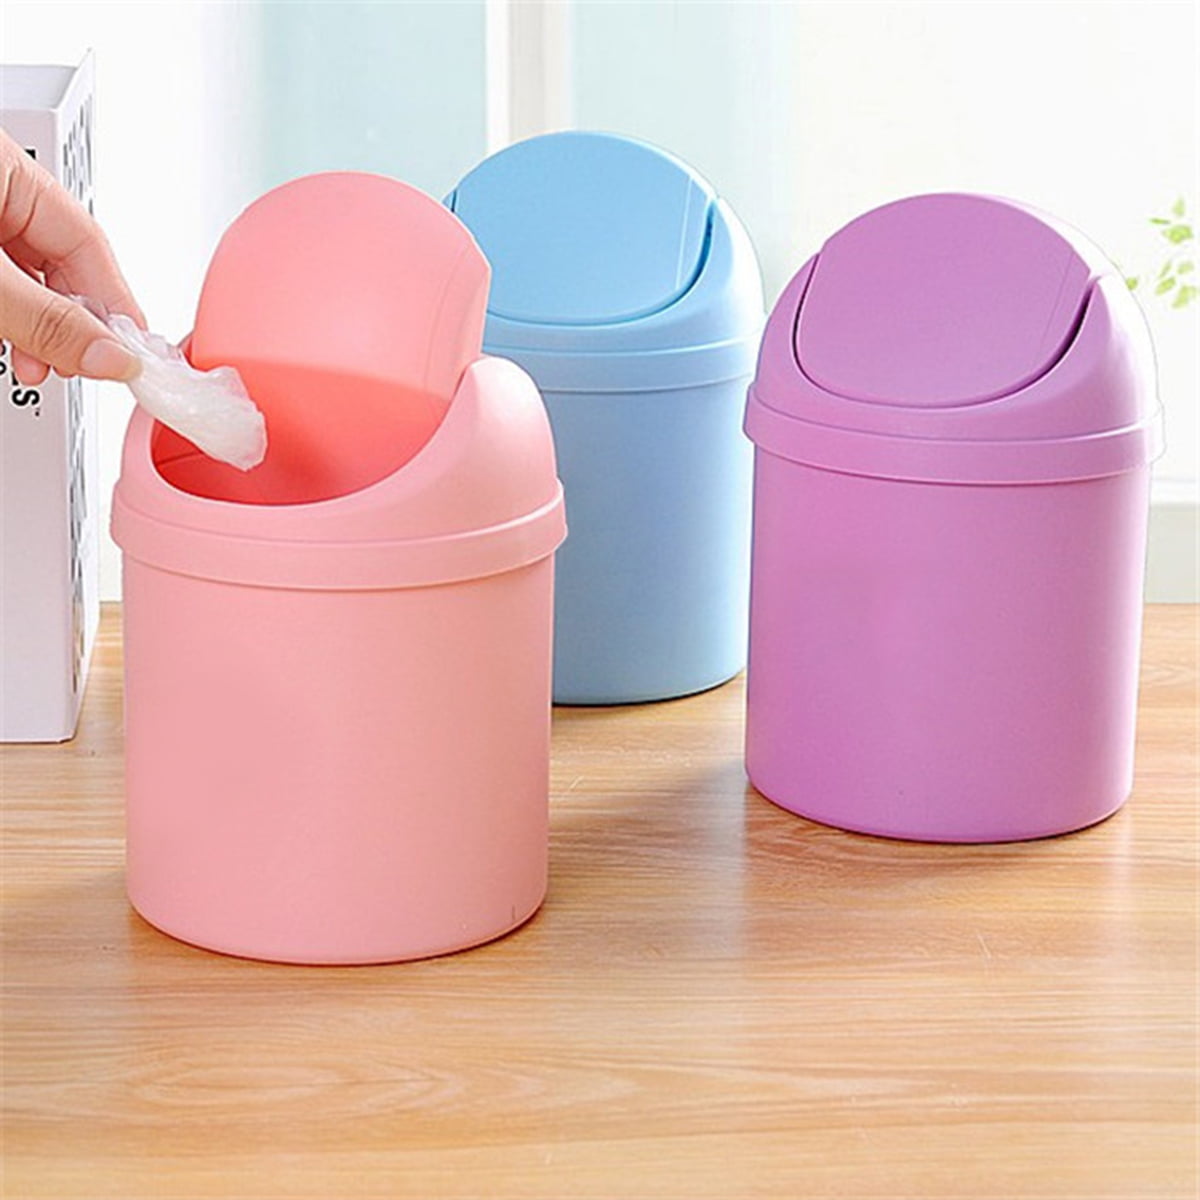 Tomaibaby Mini Table Trash Can Small Trash Bin Counter Top Garbage Bin with Swing Lid for Table Desktop Office Kitchen 